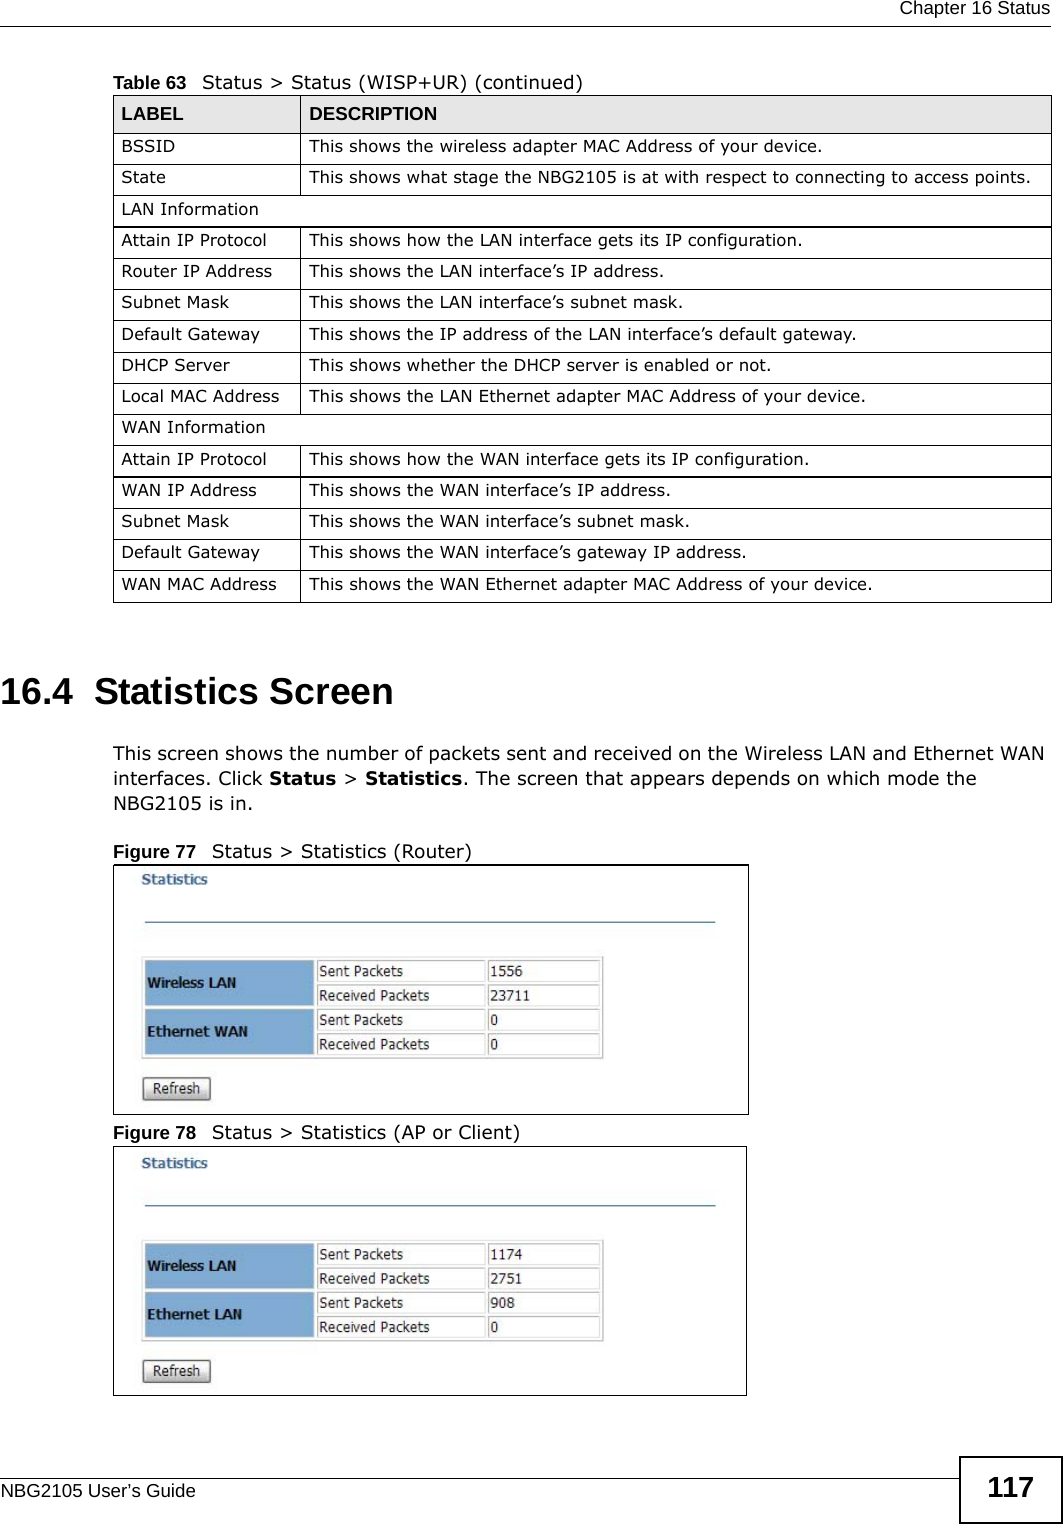  Chapter 16 StatusNBG2105 User’s Guide 11716.4  Statistics ScreenThis screen shows the number of packets sent and received on the Wireless LAN and Ethernet WAN interfaces. Click Status &gt; Statistics. The screen that appears depends on which mode the NBG2105 is in.Figure 77   Status &gt; Statistics (Router) Figure 78   Status &gt; Statistics (AP or Client) BSSID This shows the wireless adapter MAC Address of your device.State This shows what stage the NBG2105 is at with respect to connecting to access points.LAN InformationAttain IP Protocol This shows how the LAN interface gets its IP configuration.Router IP Address This shows the LAN interface’s IP address.Subnet Mask This shows the LAN interface’s subnet mask.Default Gateway This shows the IP address of the LAN interface’s default gateway.DHCP Server This shows whether the DHCP server is enabled or not.Local MAC Address This shows the LAN Ethernet adapter MAC Address of your device.WAN InformationAttain IP Protocol This shows how the WAN interface gets its IP configuration.WAN IP Address This shows the WAN interface’s IP address.Subnet Mask This shows the WAN interface’s subnet mask.Default Gateway This shows the WAN interface’s gateway IP address.WAN MAC Address This shows the WAN Ethernet adapter MAC Address of your device.Table 63   Status &gt; Status (WISP+UR) (continued)LABEL DESCRIPTION